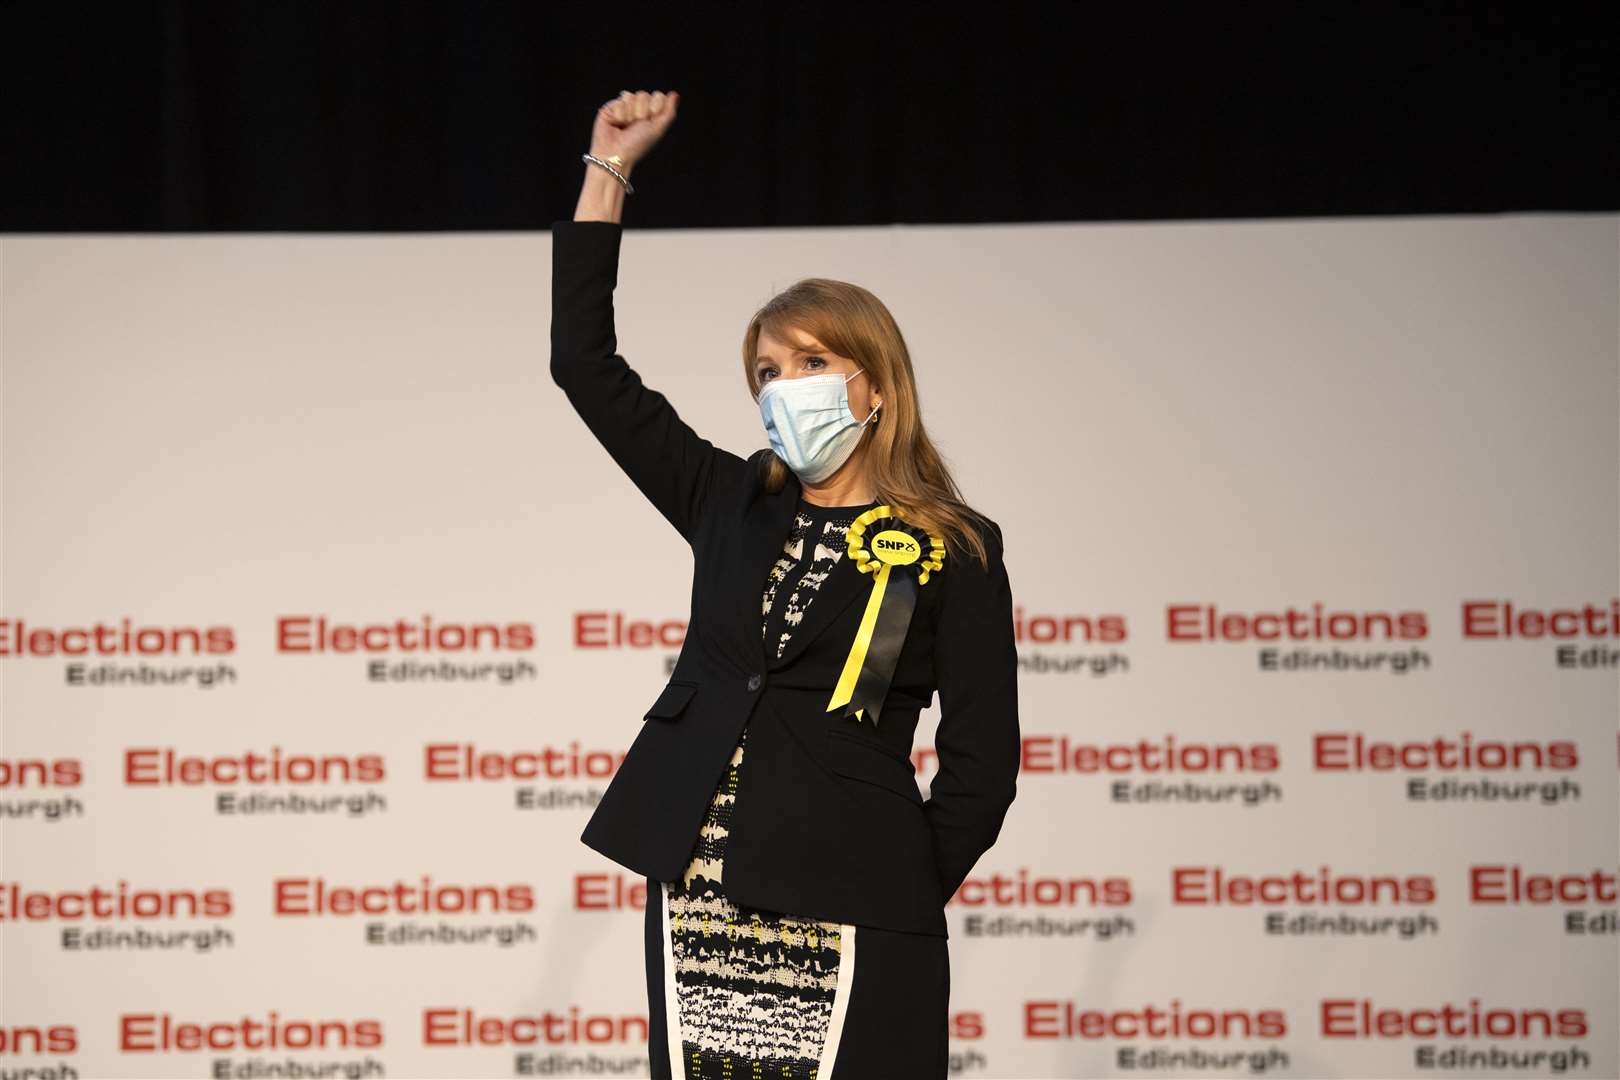 Ms Denham reacts as she holds her seat for the Scottish Parliamentary Elections at Ingliston Highland Centre, Edinburgh in 2021 (PA)